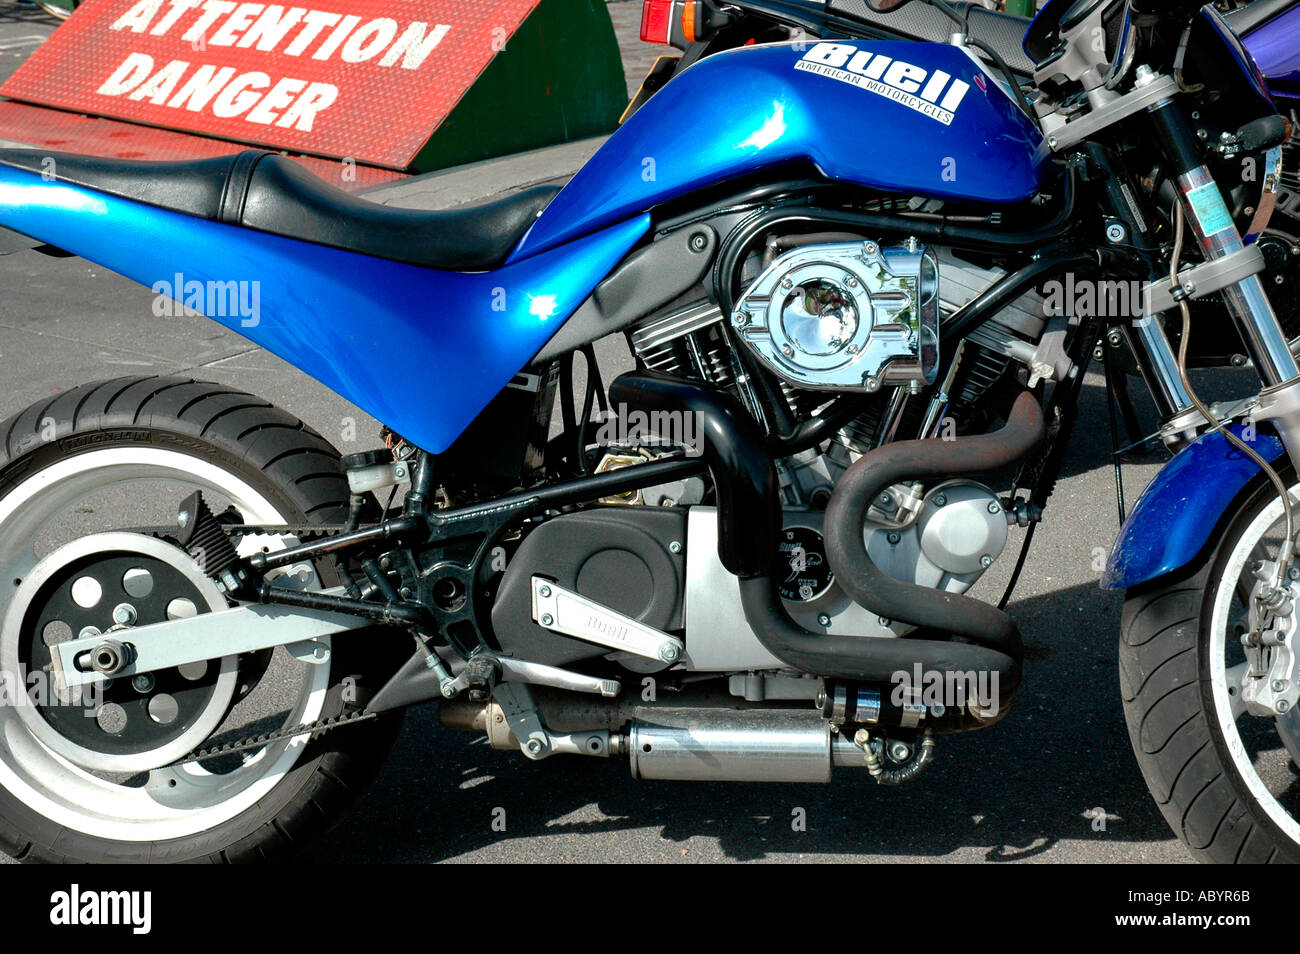 Is Buell Made By Harley-Davidson? - Mastery Wiki